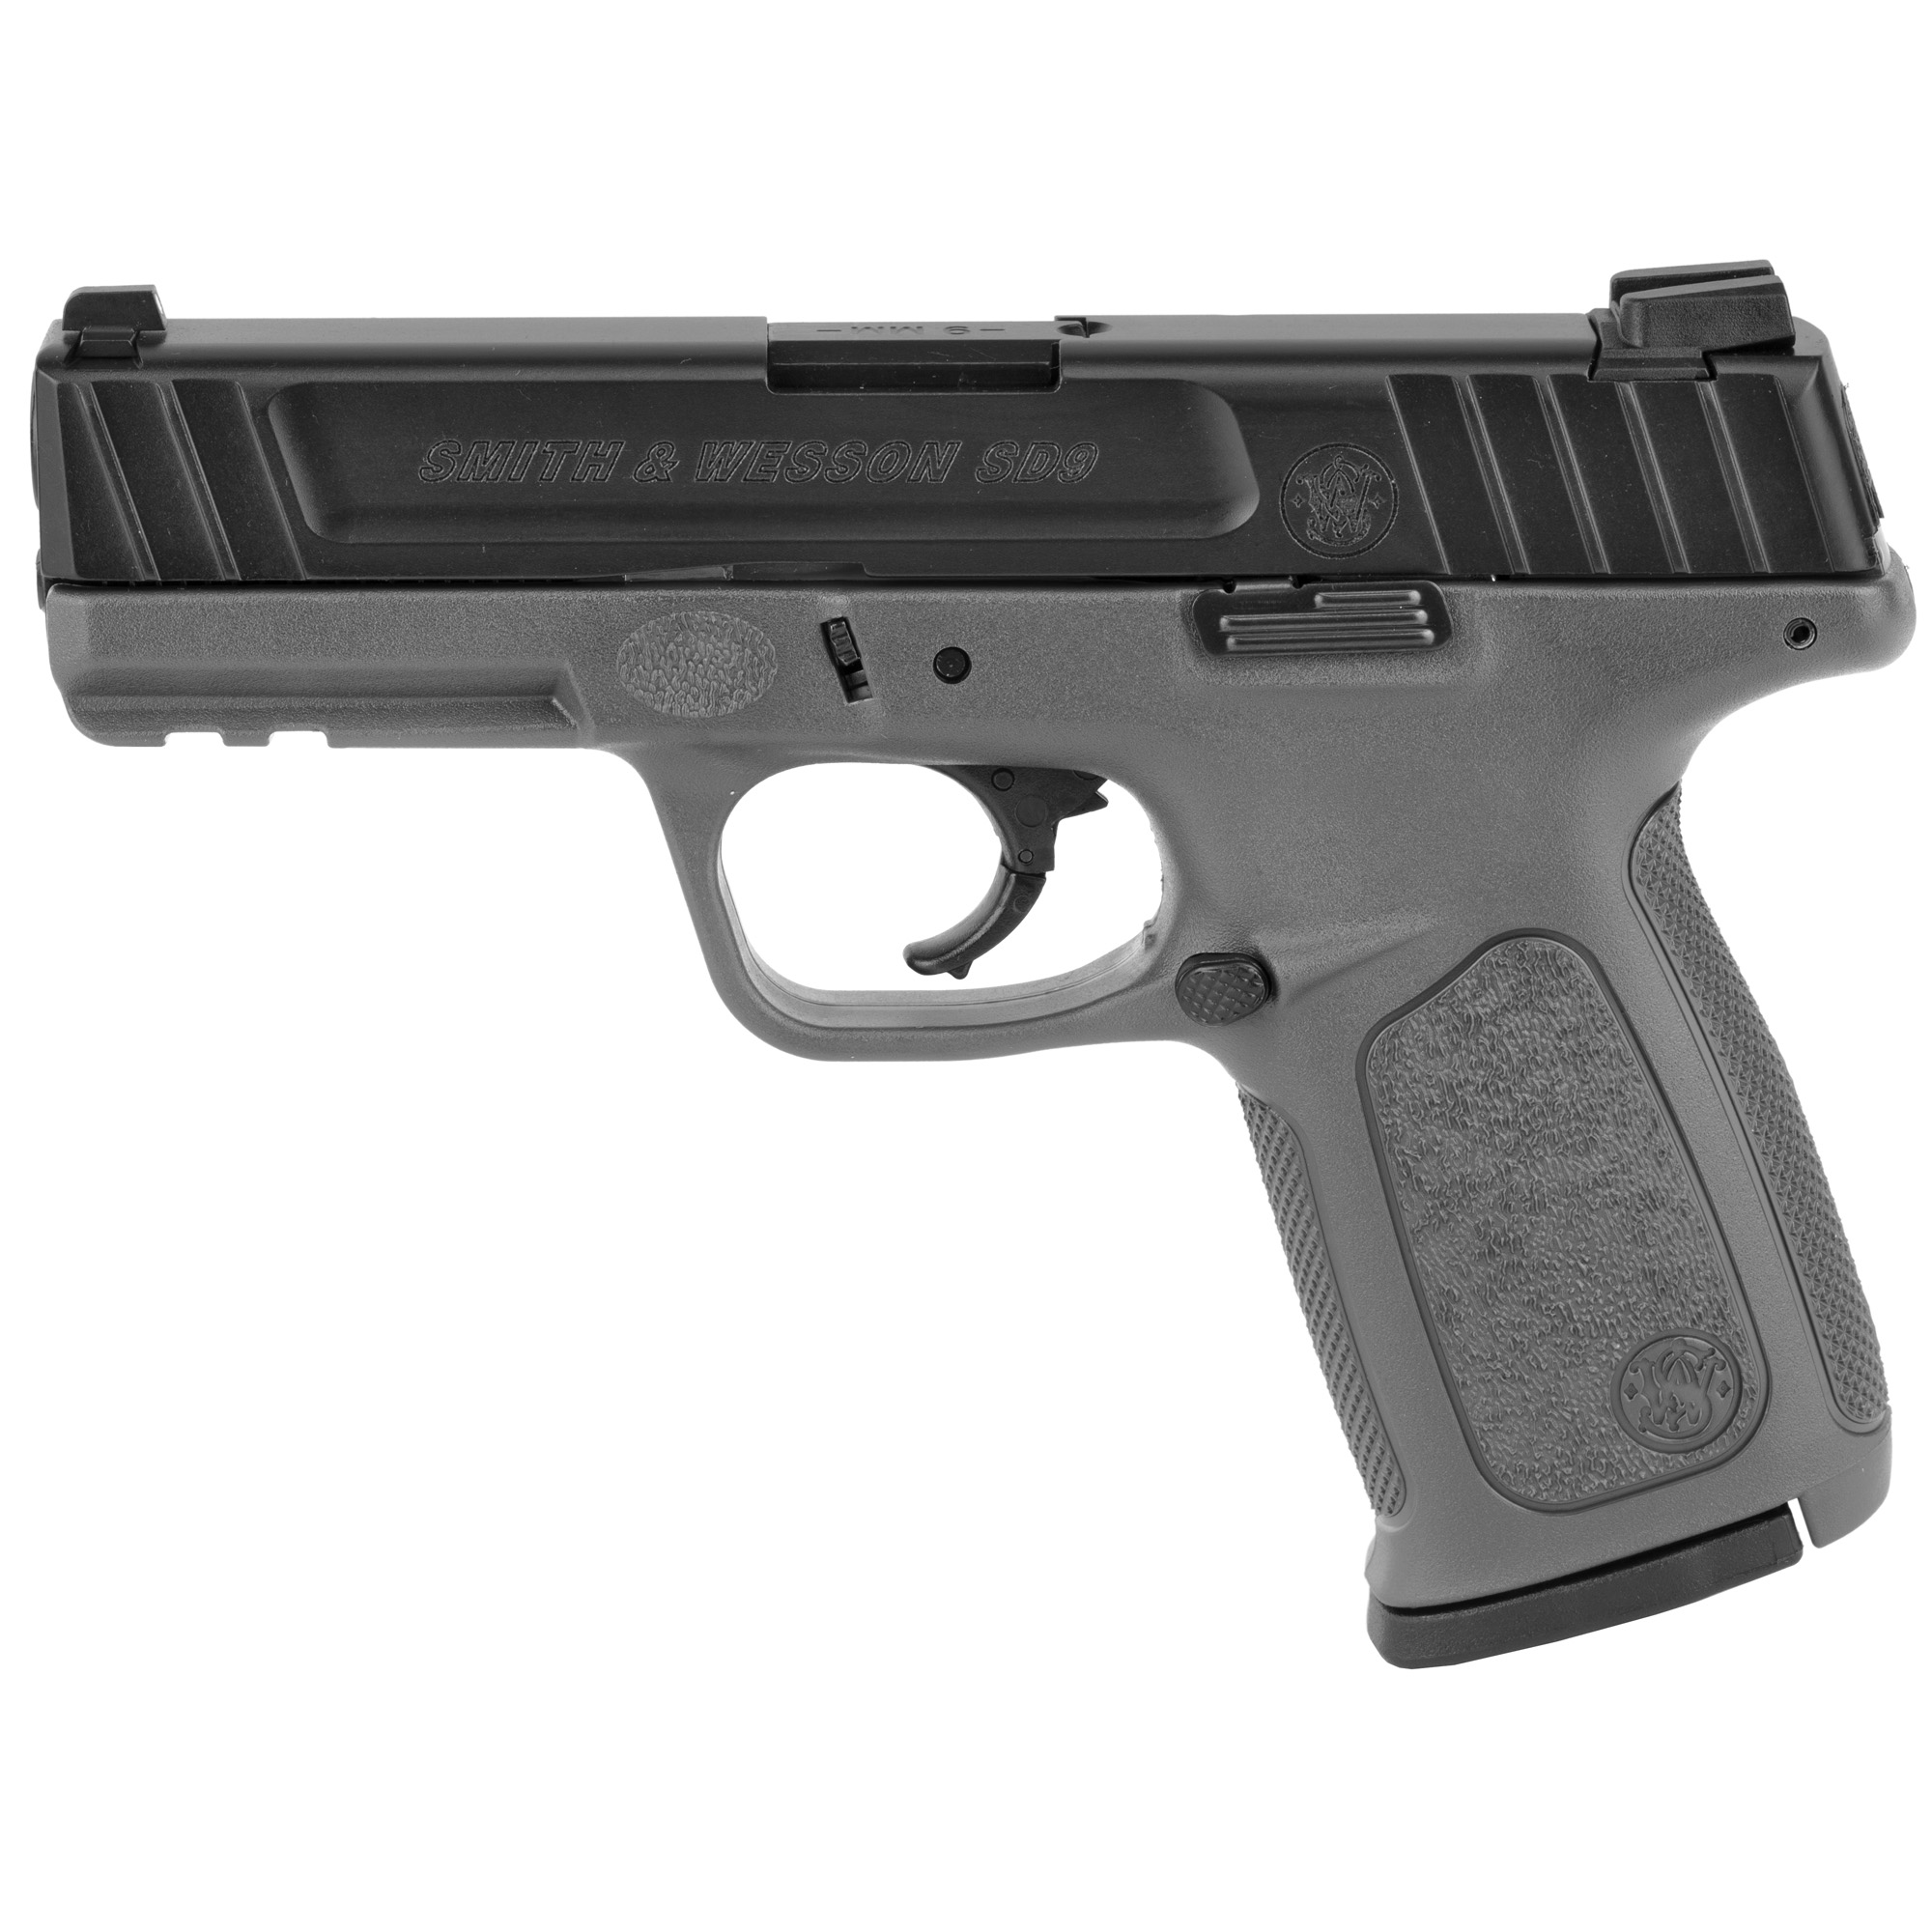 S&W SD9 9MM 4 16RD GRY FS 2 MAGS